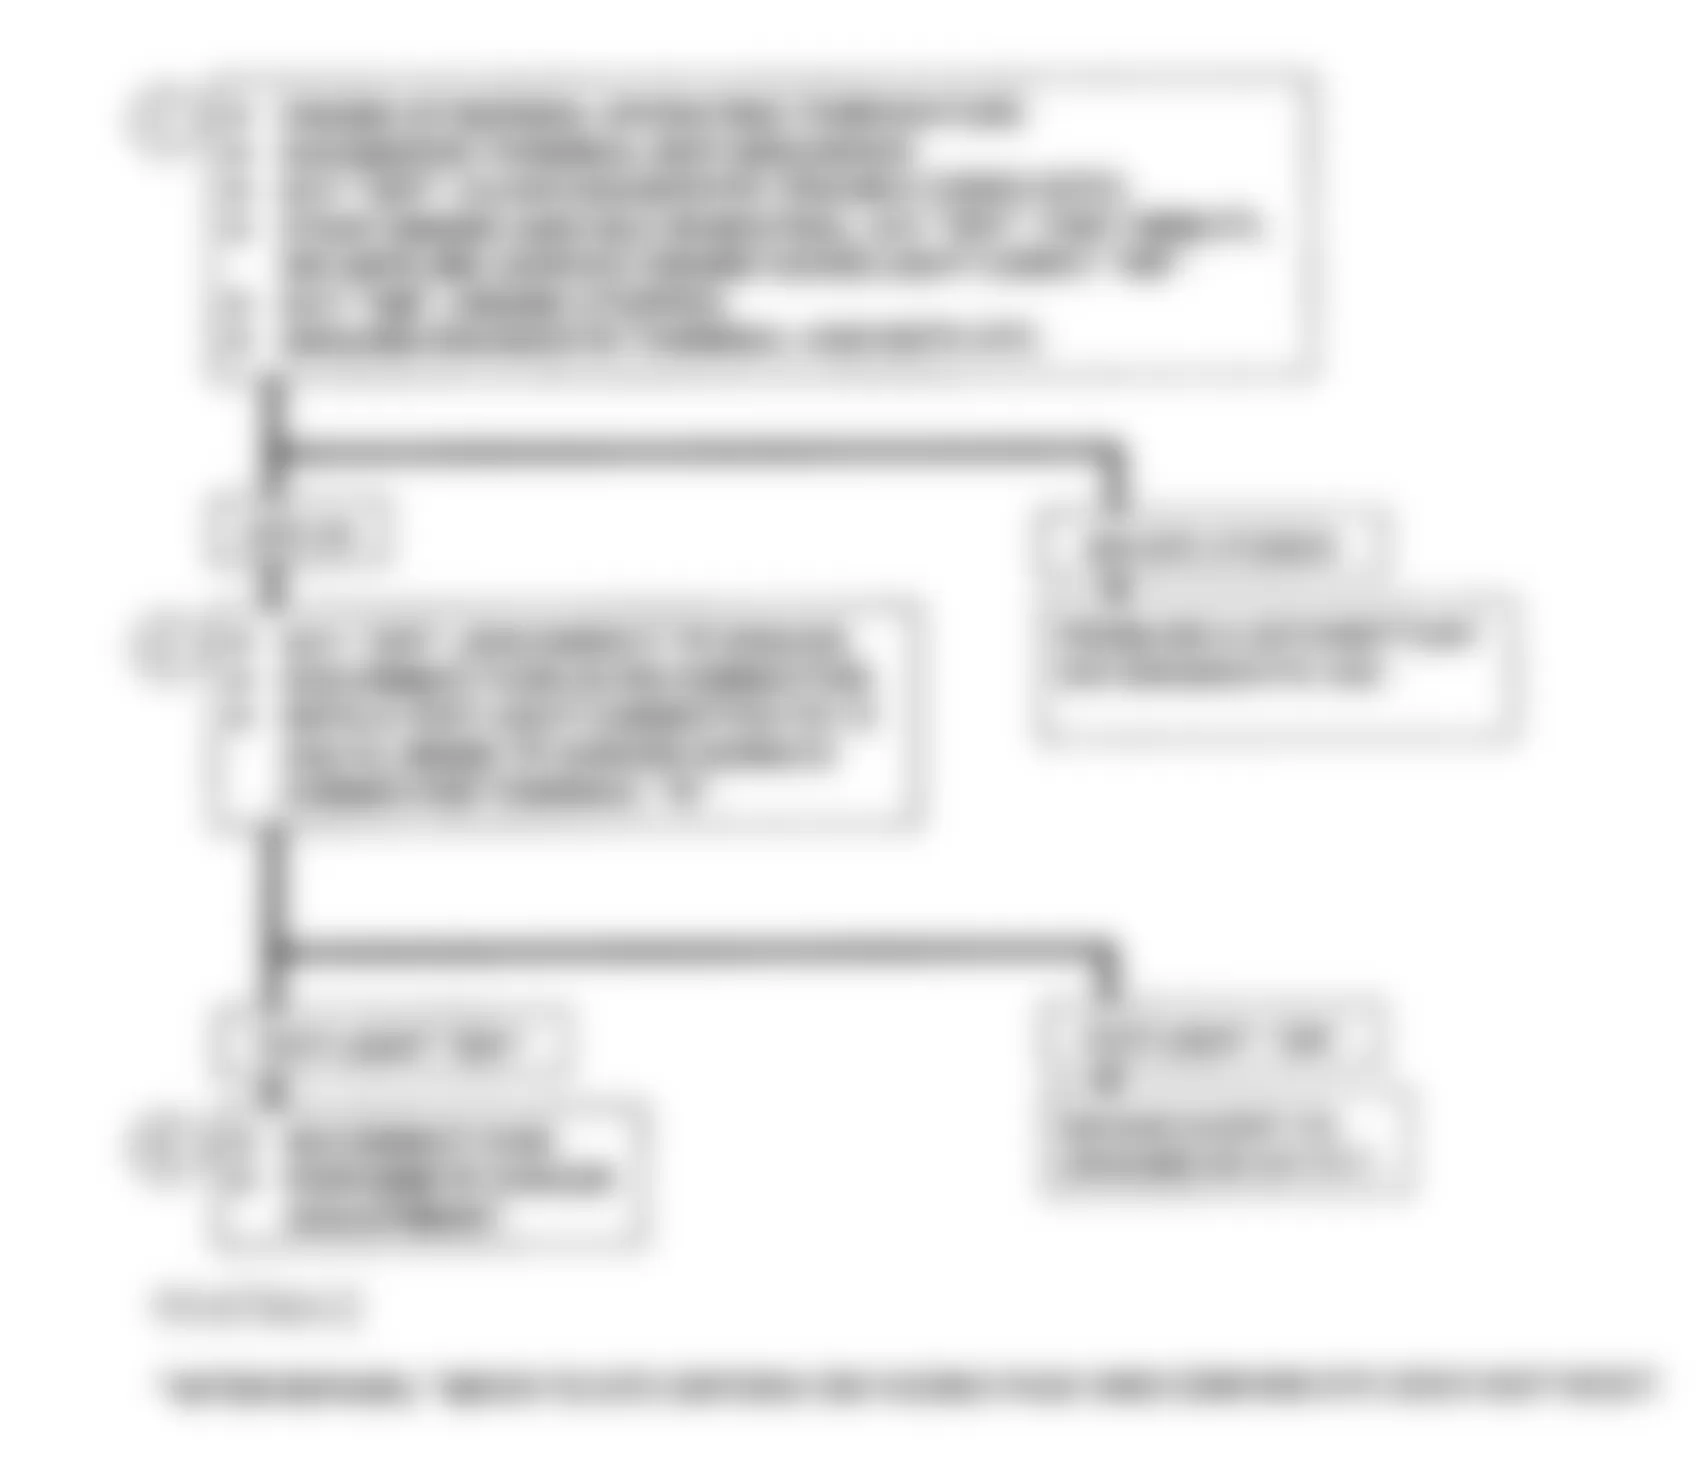 GMC Pickup C2500 1993 - Component Locations -  DTC 23, Flowchart, TPS Misadjusted